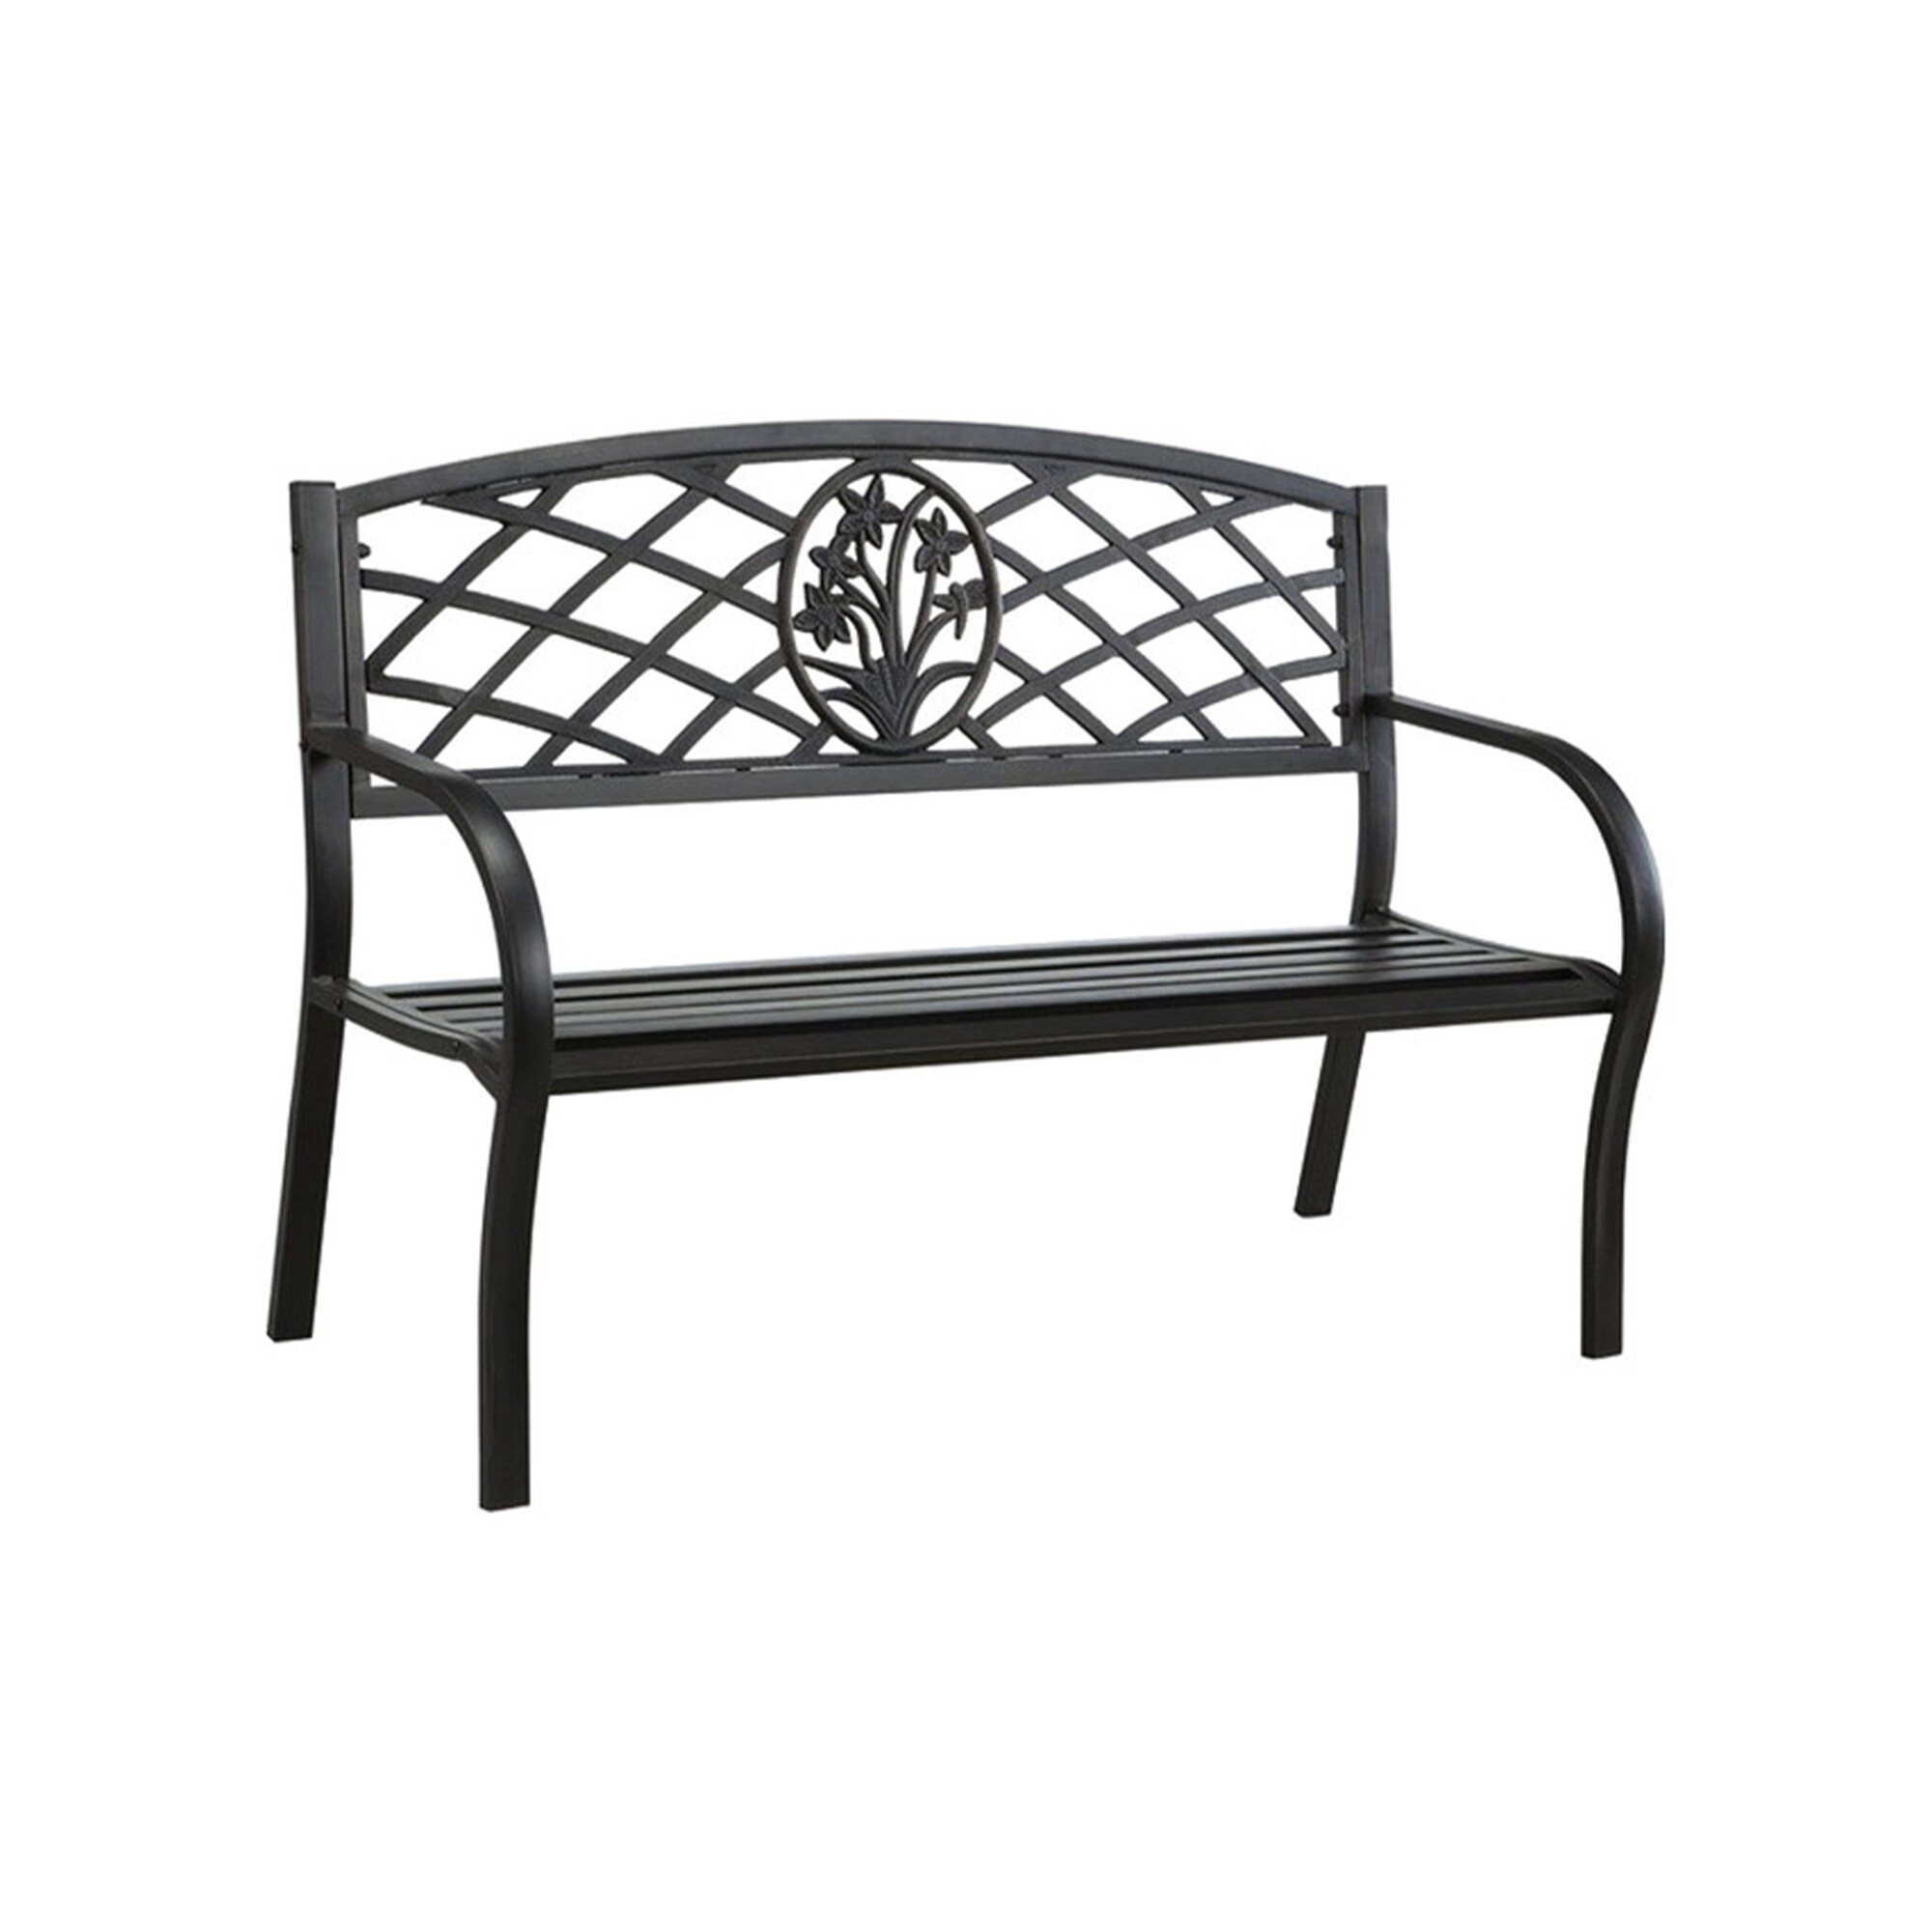 Minot Slated Seat Patio Bench, Black 33.88 H X 20 W X 50.4 L Inches